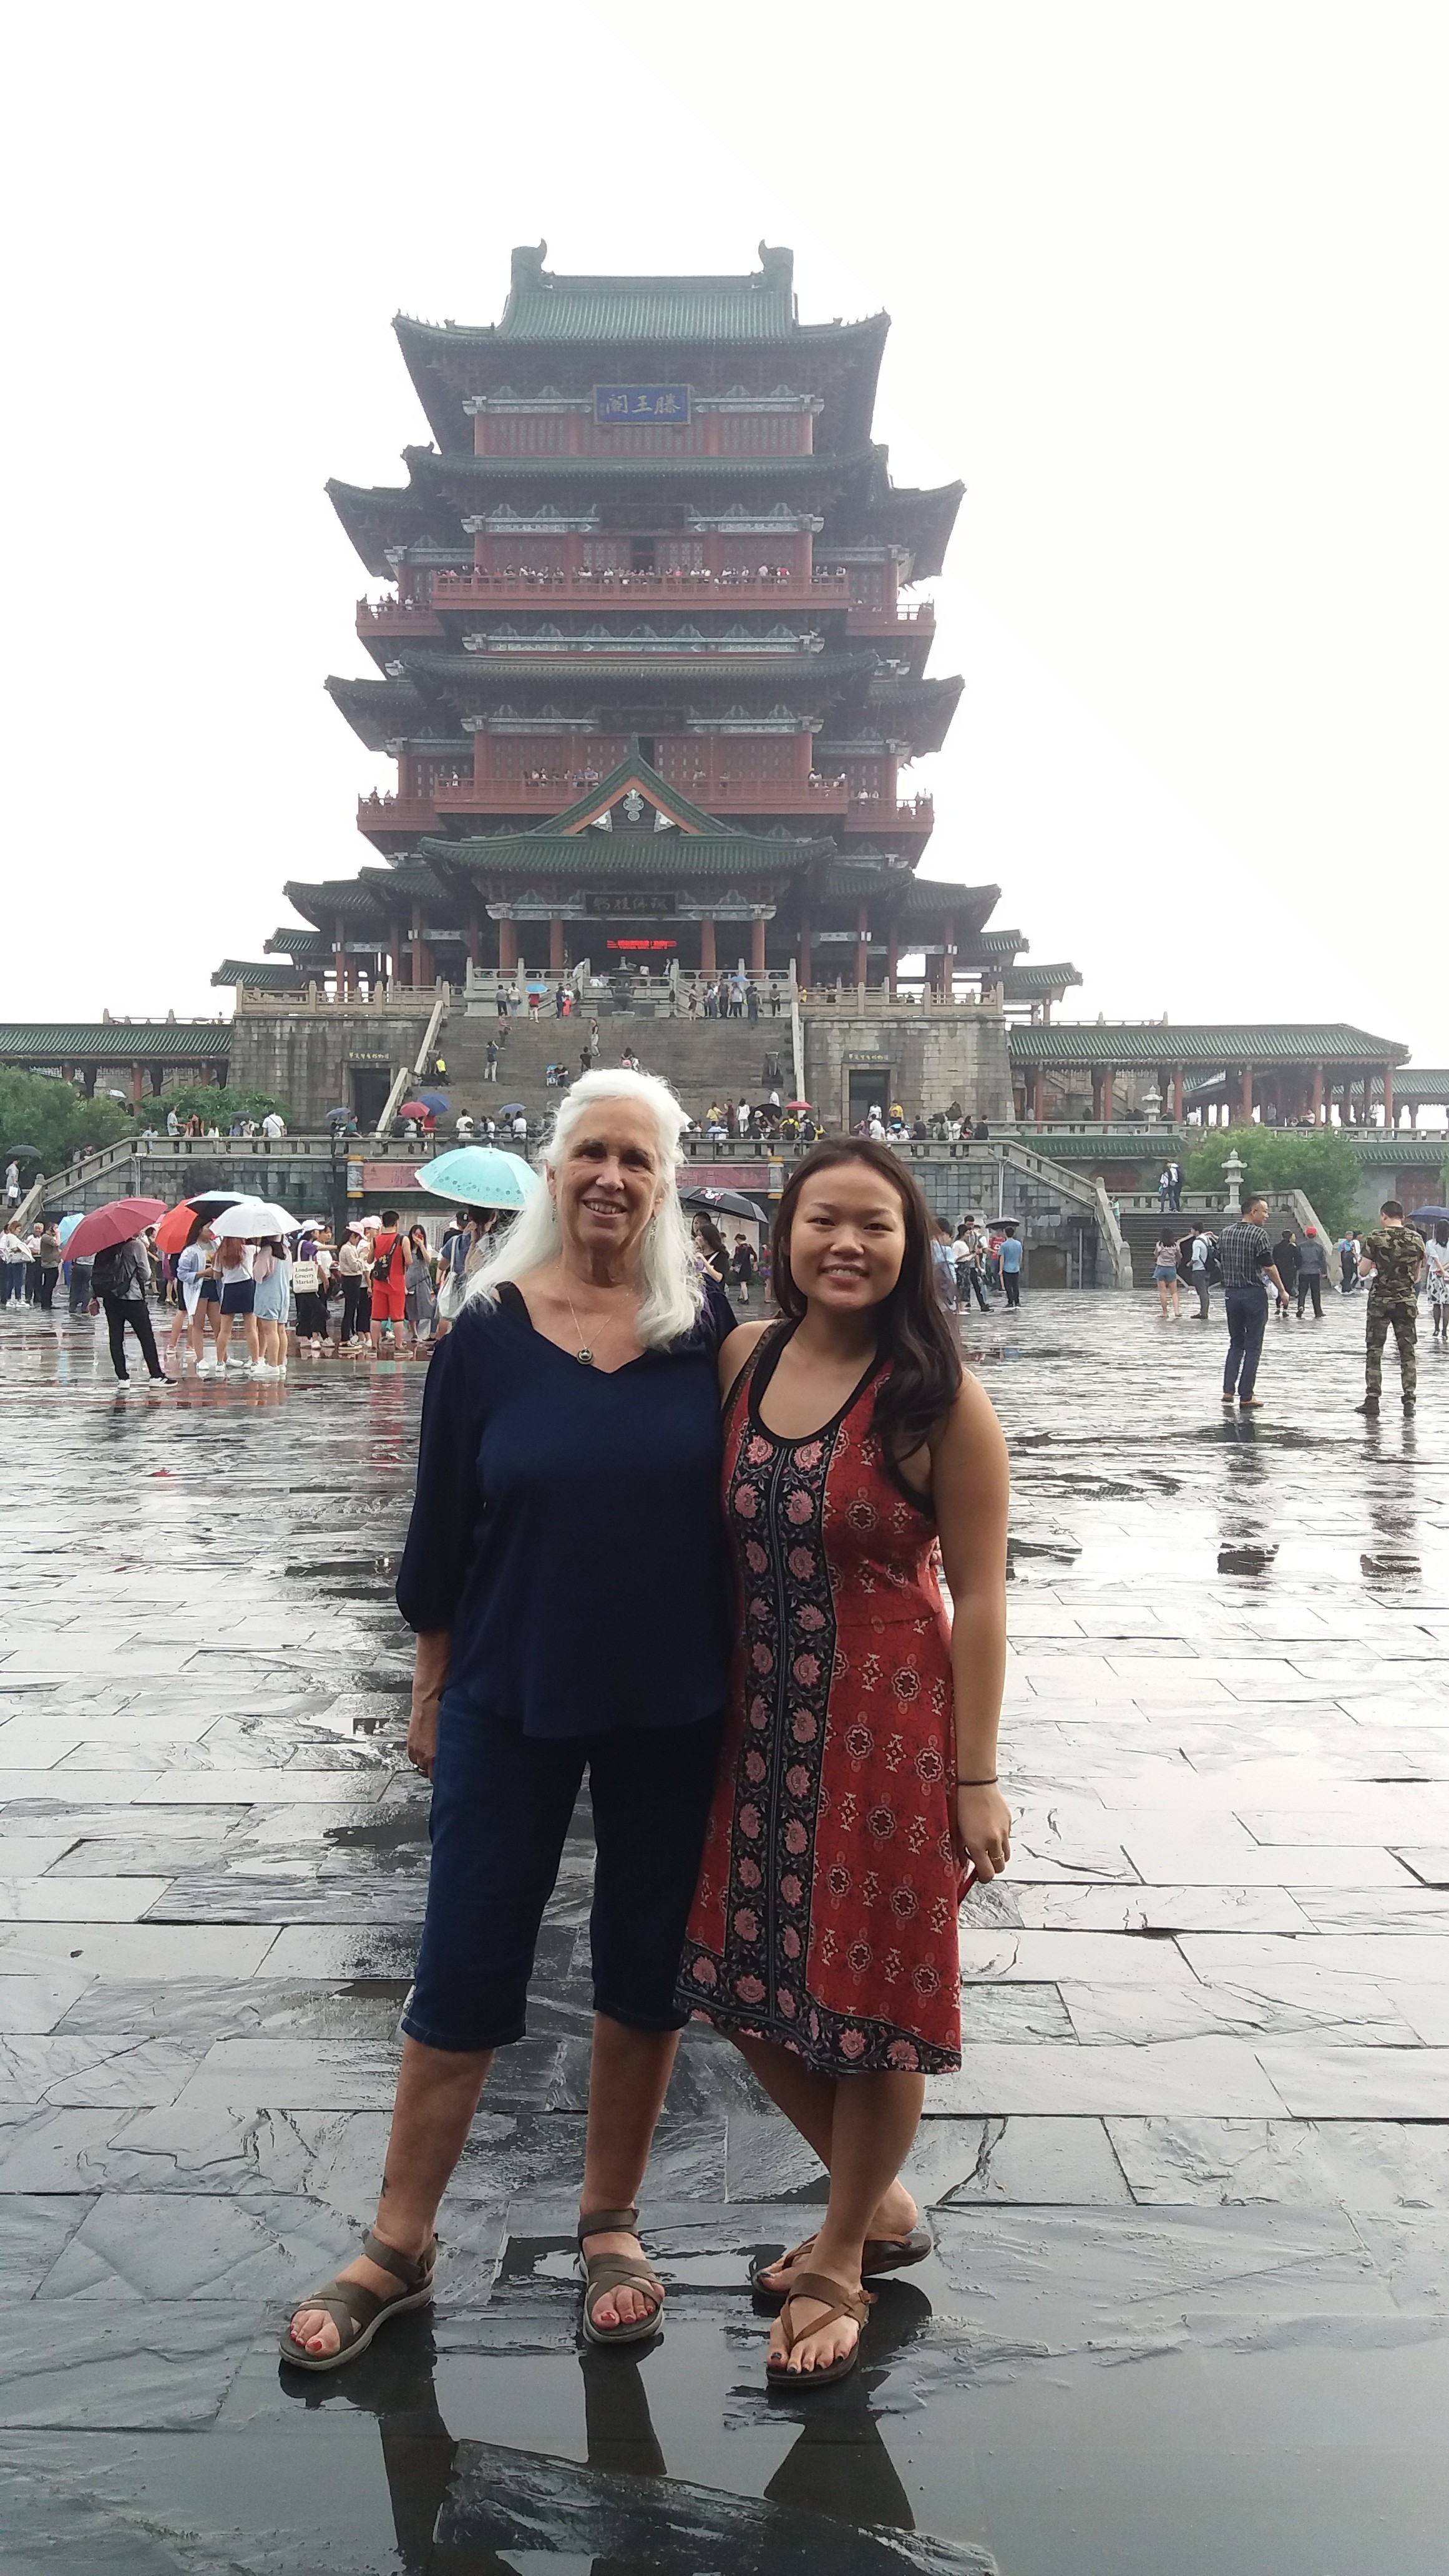 In 1996, Carol Free adopted a girl, who she named Kathryn, and took her to California. This year Kathryn returned to China to seek her biological parents – but, for any number of reasons, they may not want to be found